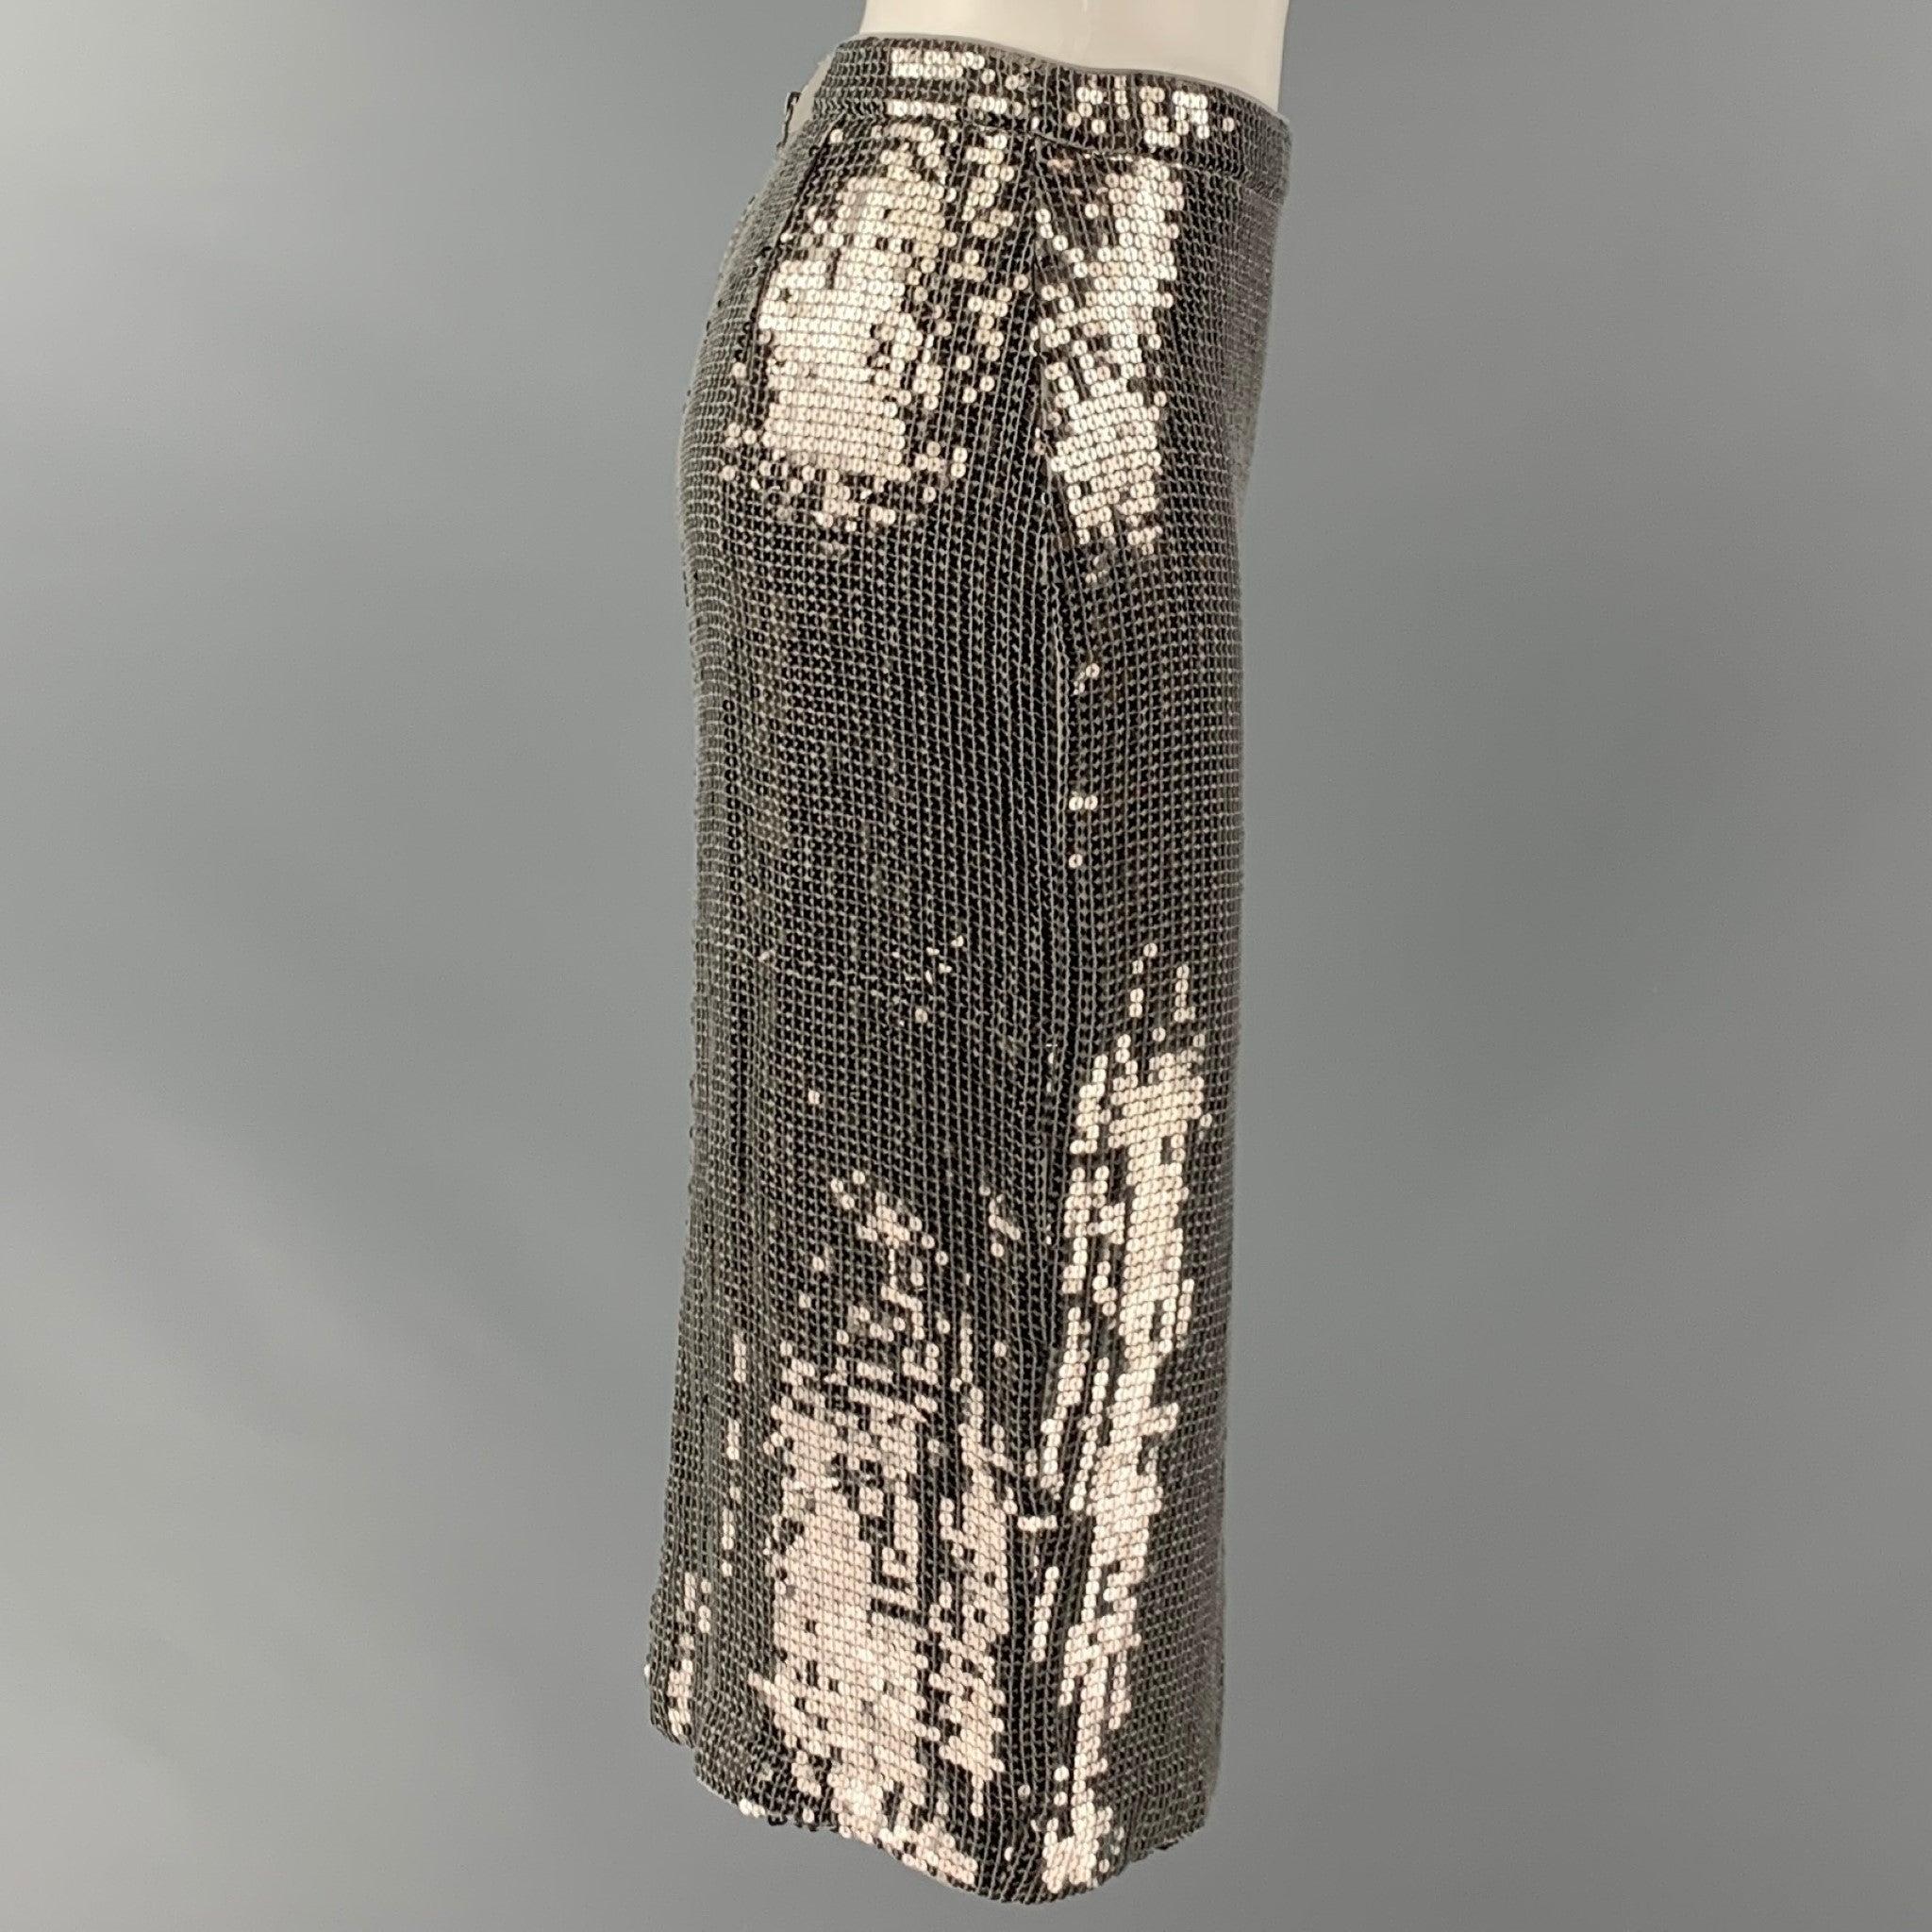 ALICE + OLIVIA skirt comes in a silver sequined viscose woven featuring a pencil style, and a side zipper closure.New with Tags. 

Marked:   2 

Measurements: 
  Waist: 28 inches Hip: 34 inches Length: 25.5 inches 
  
  
 
Reference: